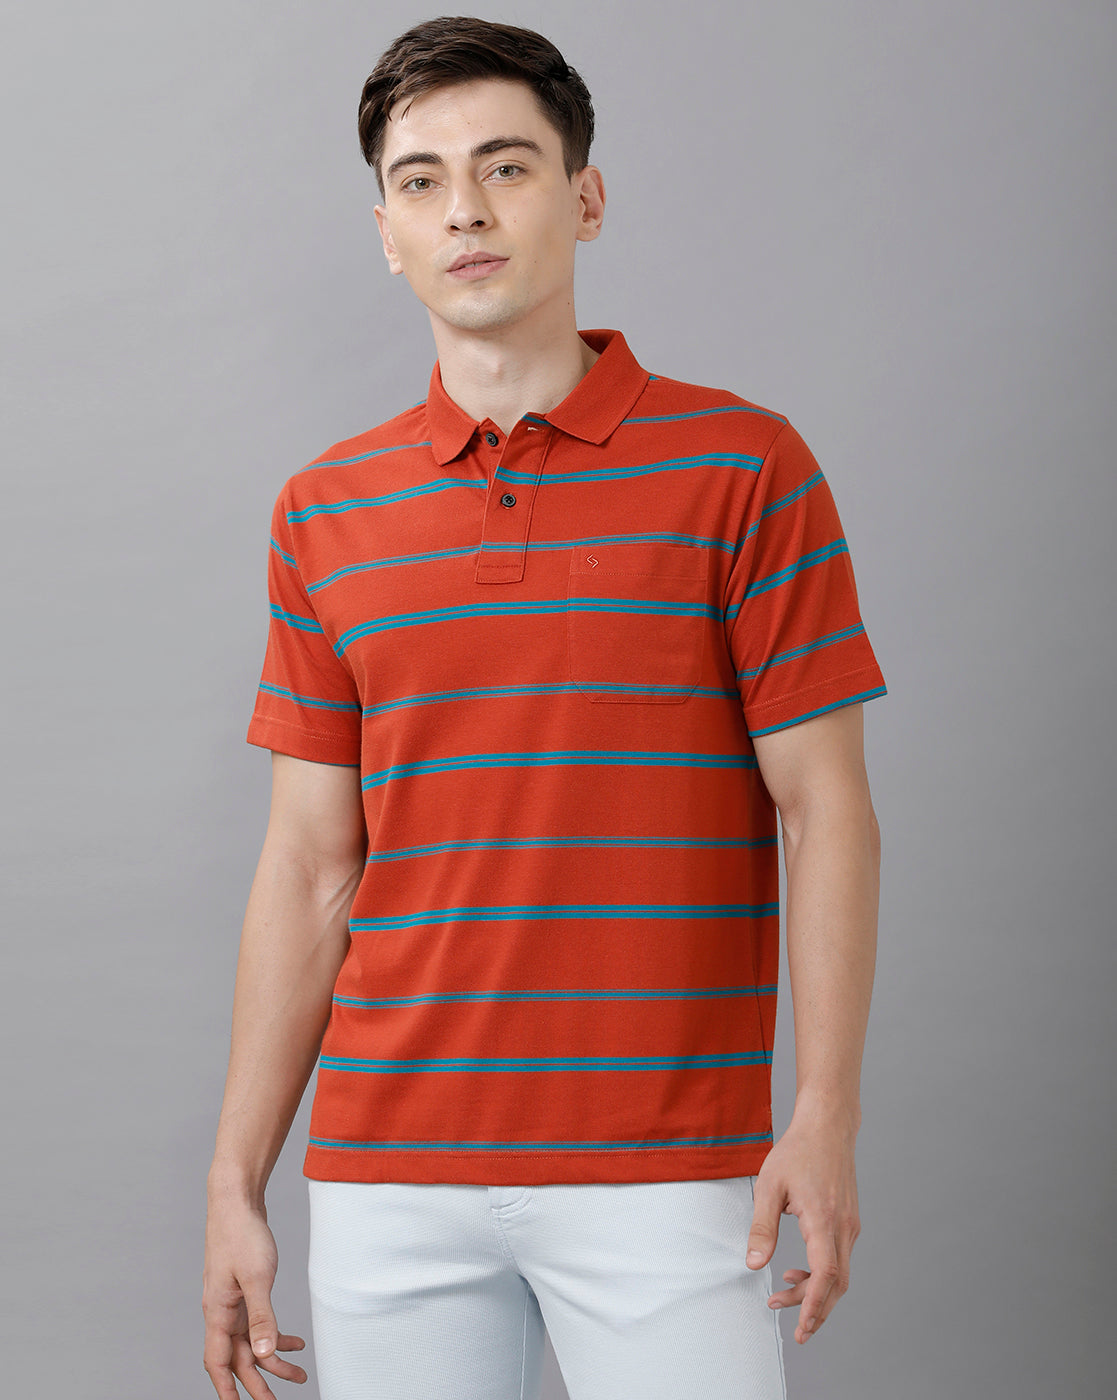 Classic Polo Men's Cotton Blend Striped Half Sleeve Regular Fit Polo Neck Red Color T-Shirt | HS-AVON - 01 A